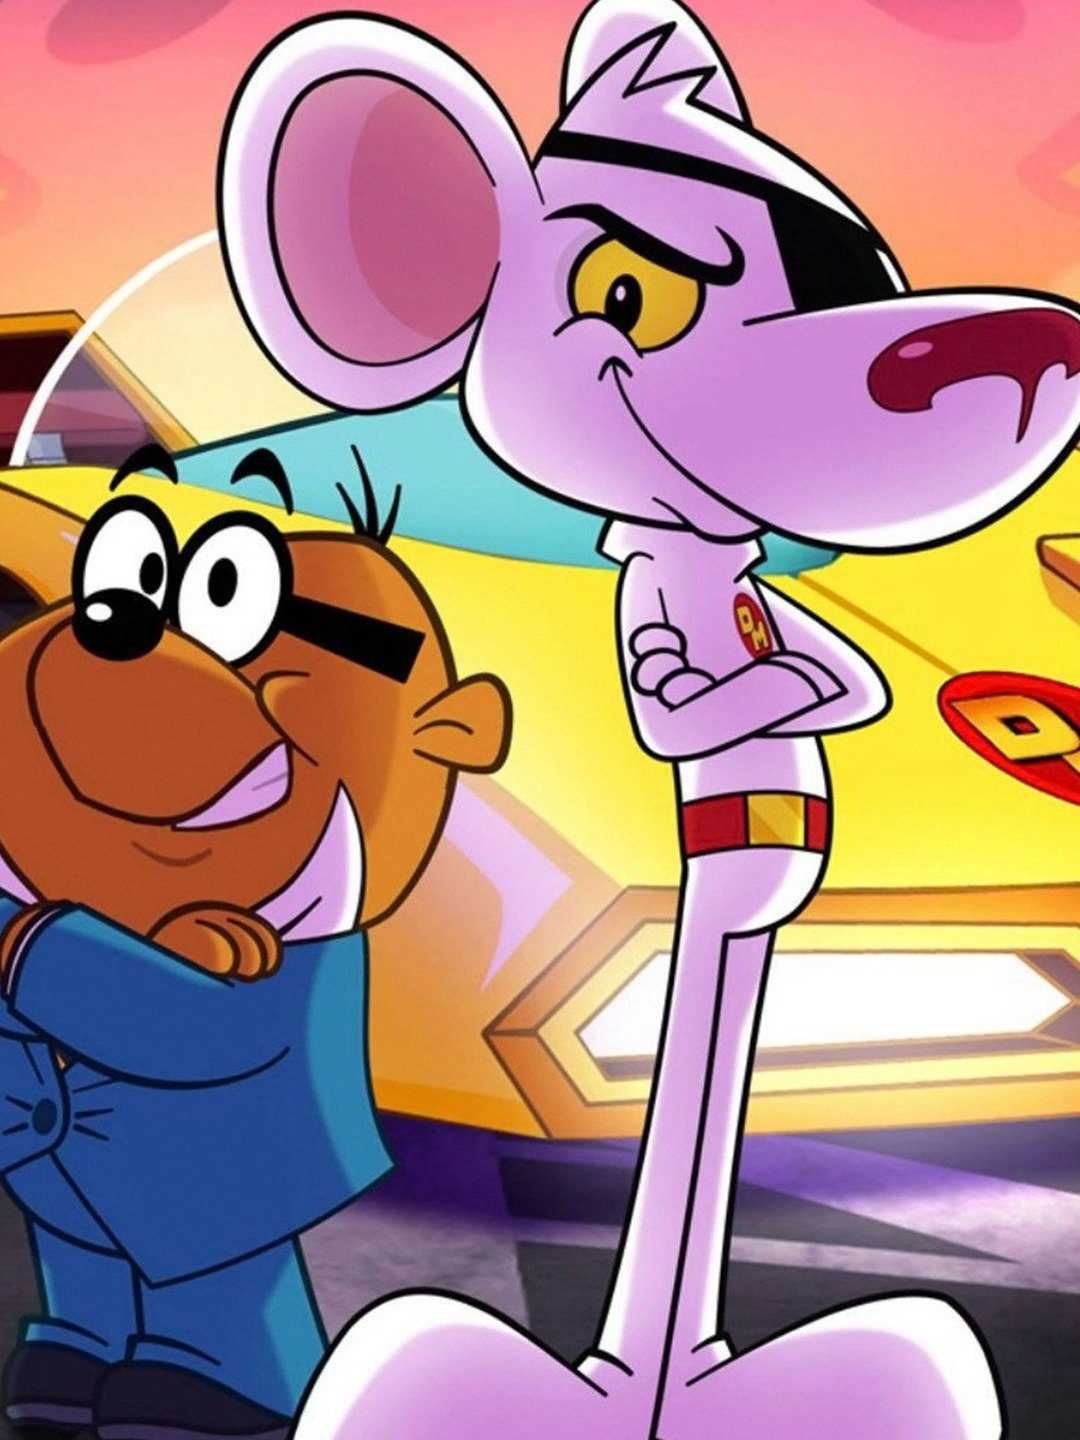 Danger mouse: classic collection (phần 9) - Danger mouse: classic collection (season 9)